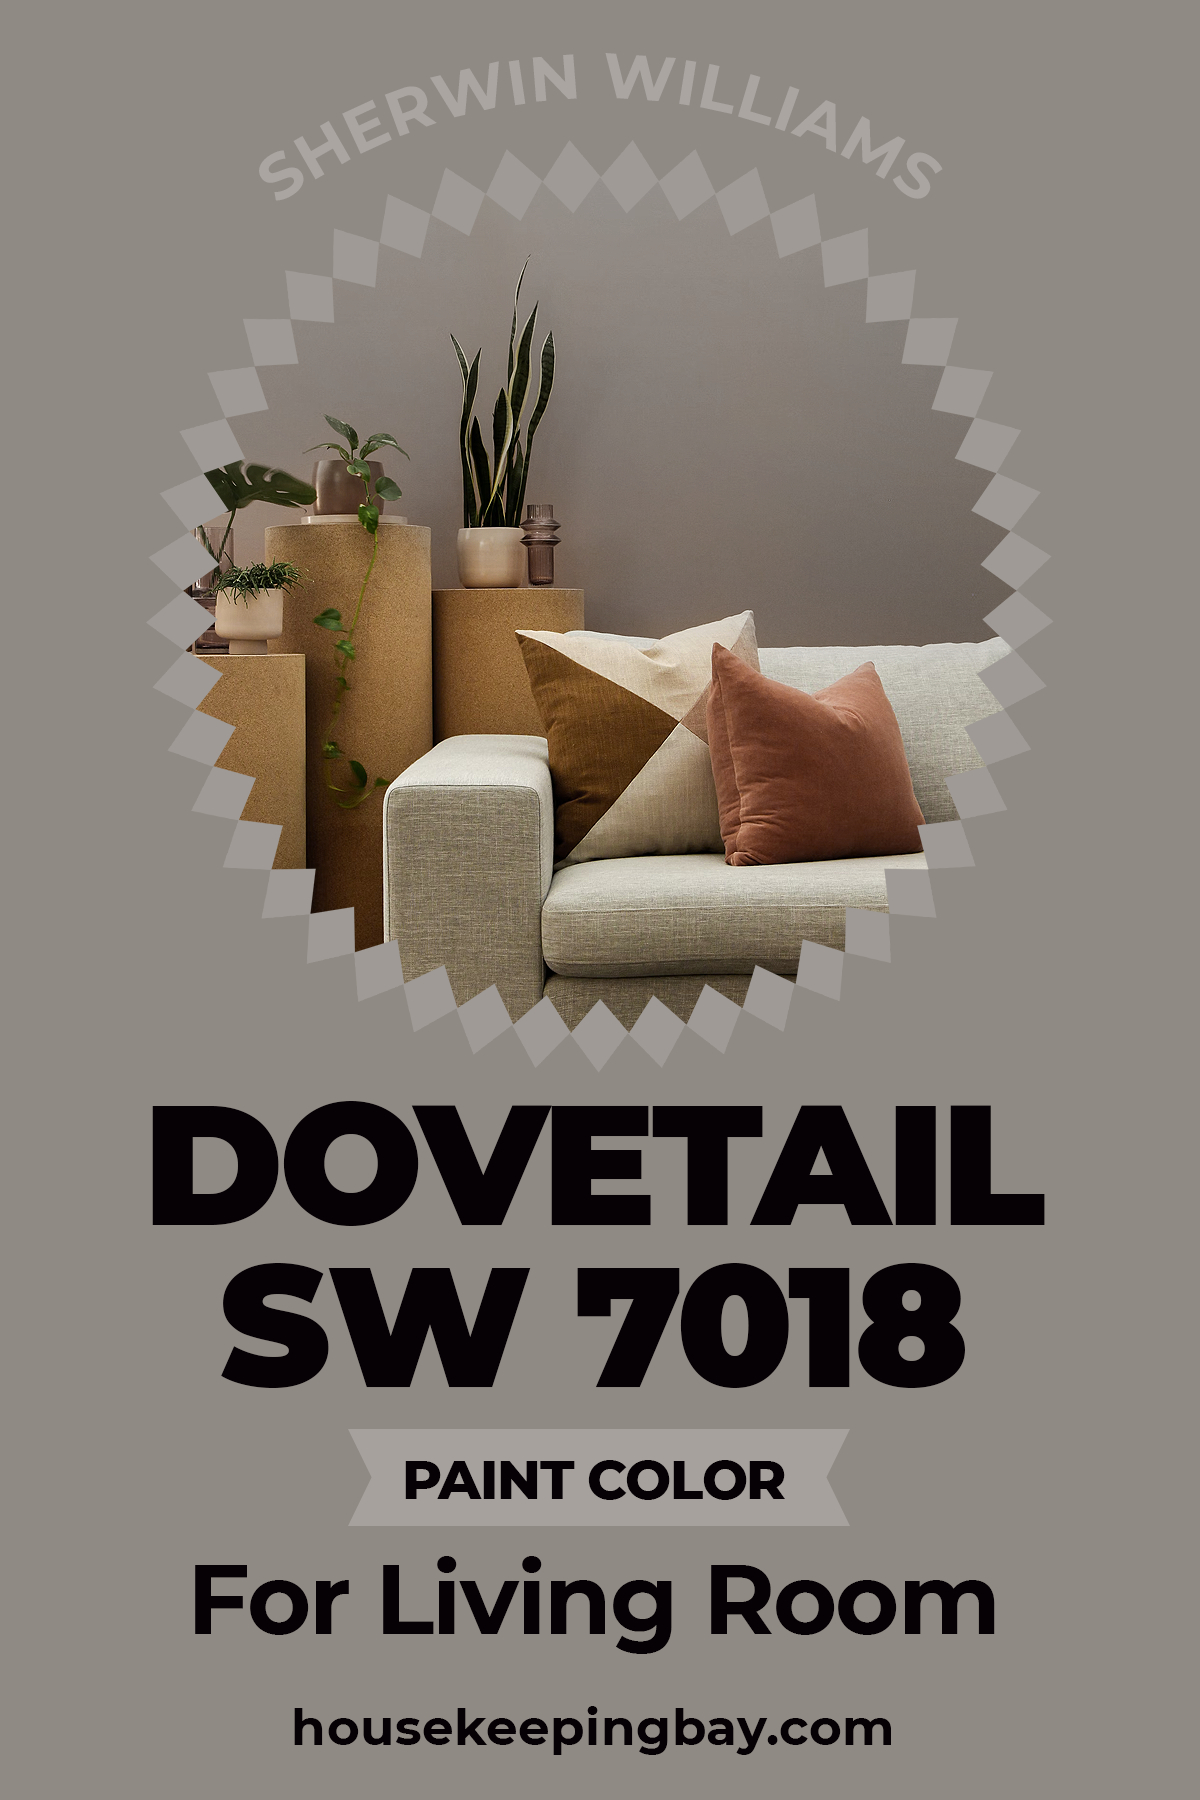 Sherwin Williams Dovetail Paint Color for living room